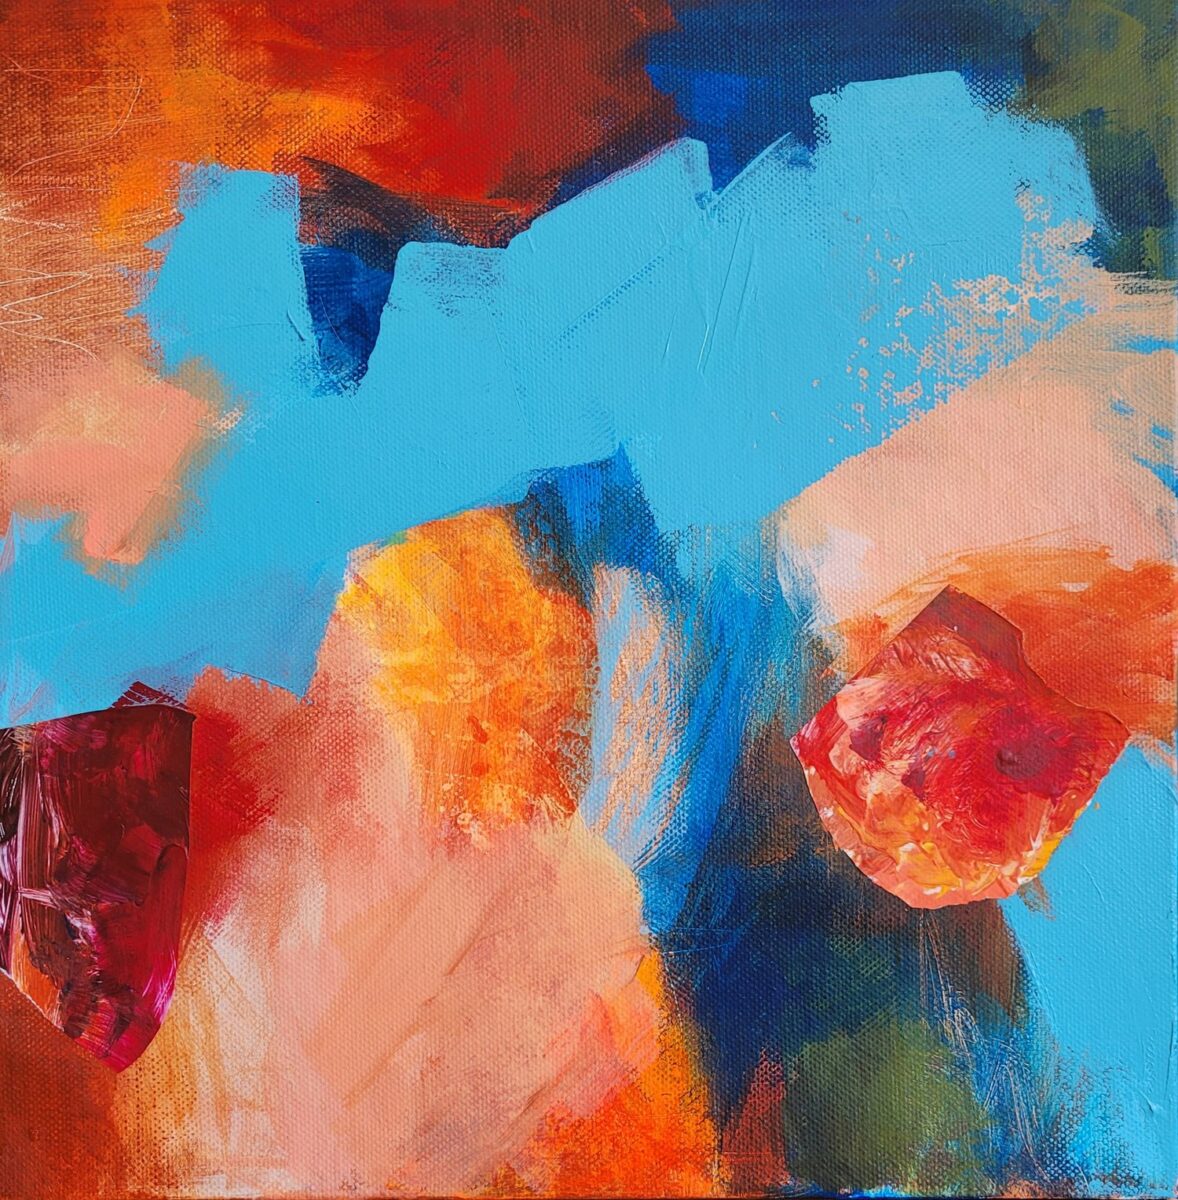 Abstract painting of red orange and blue brushstrokes